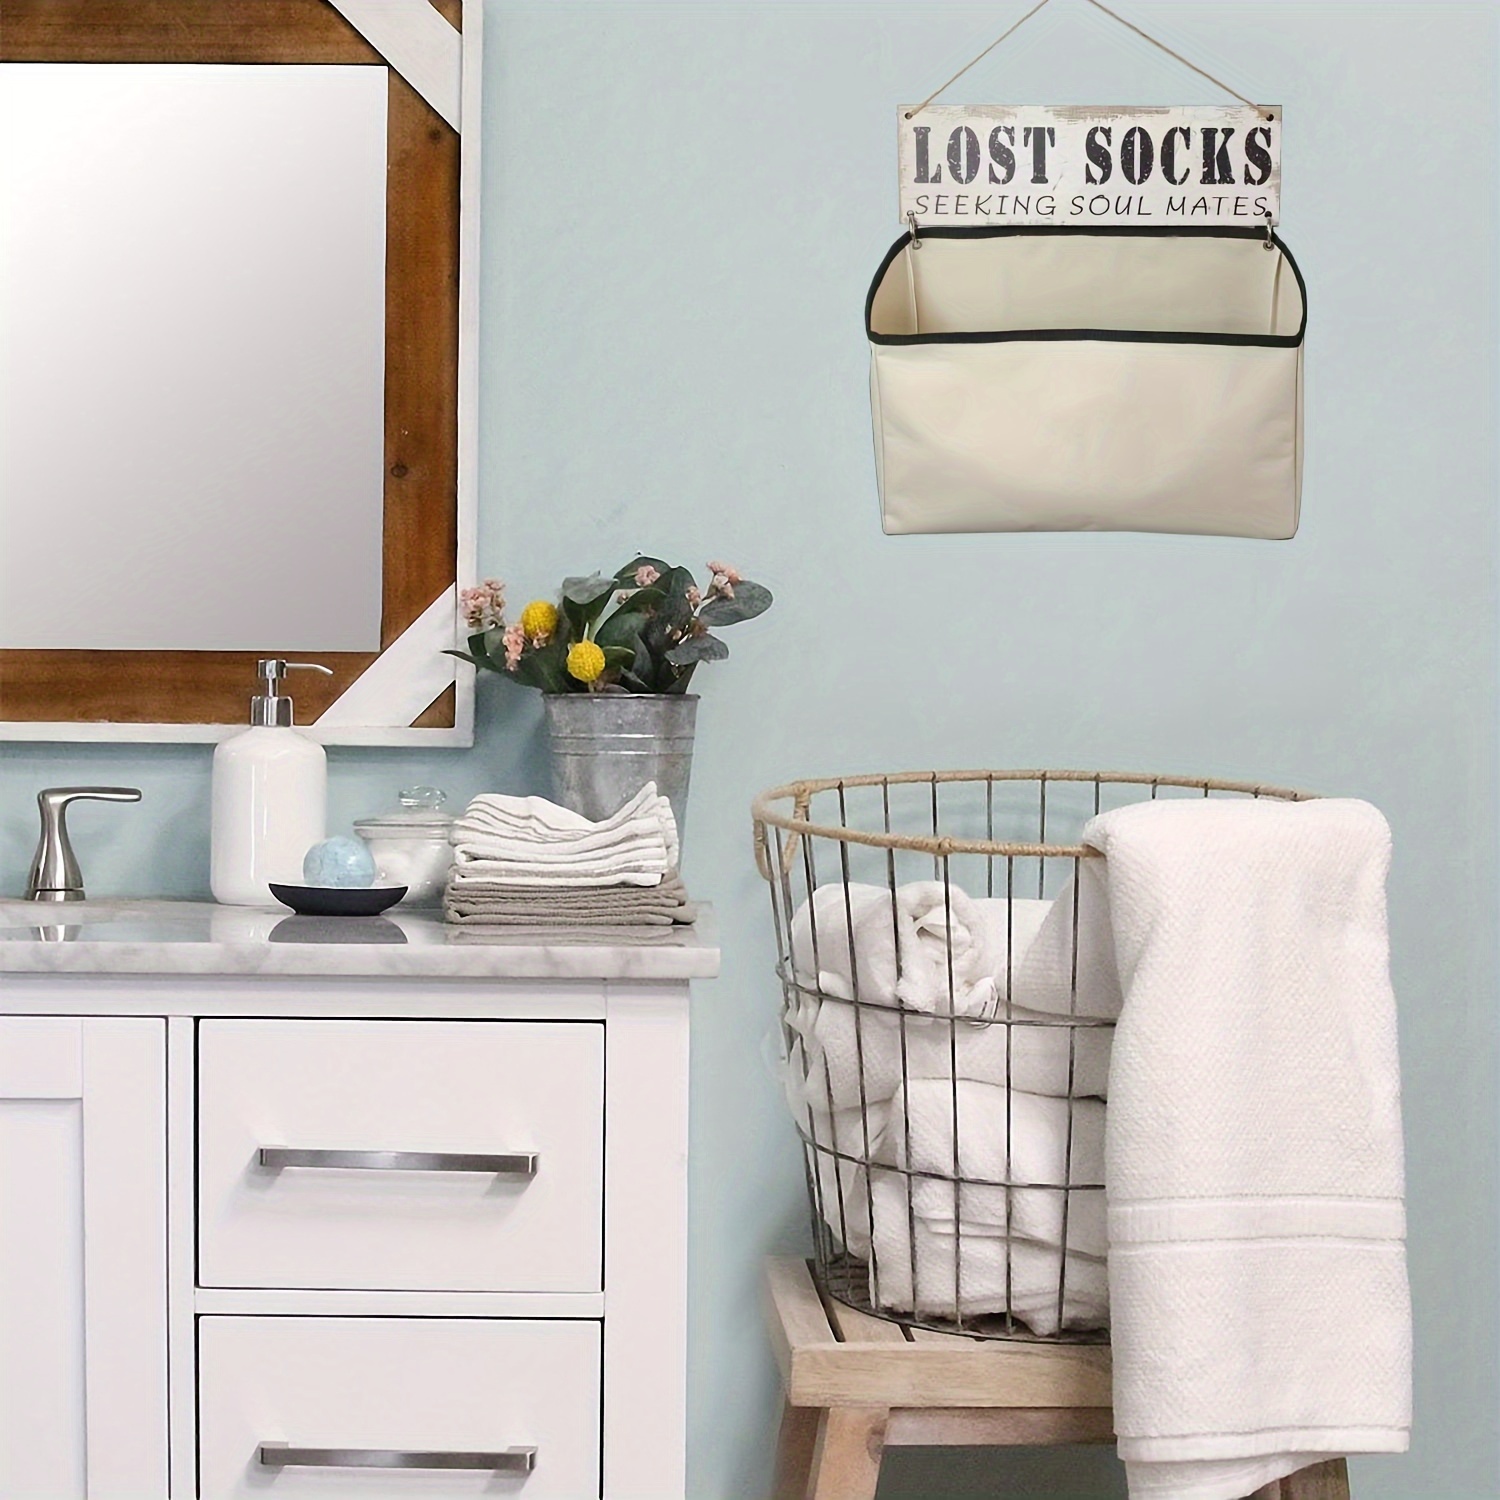 1pc laundry lost socks bag wall mounted lost sock organizer keep your laundry room clutter free and easily find your missing socks